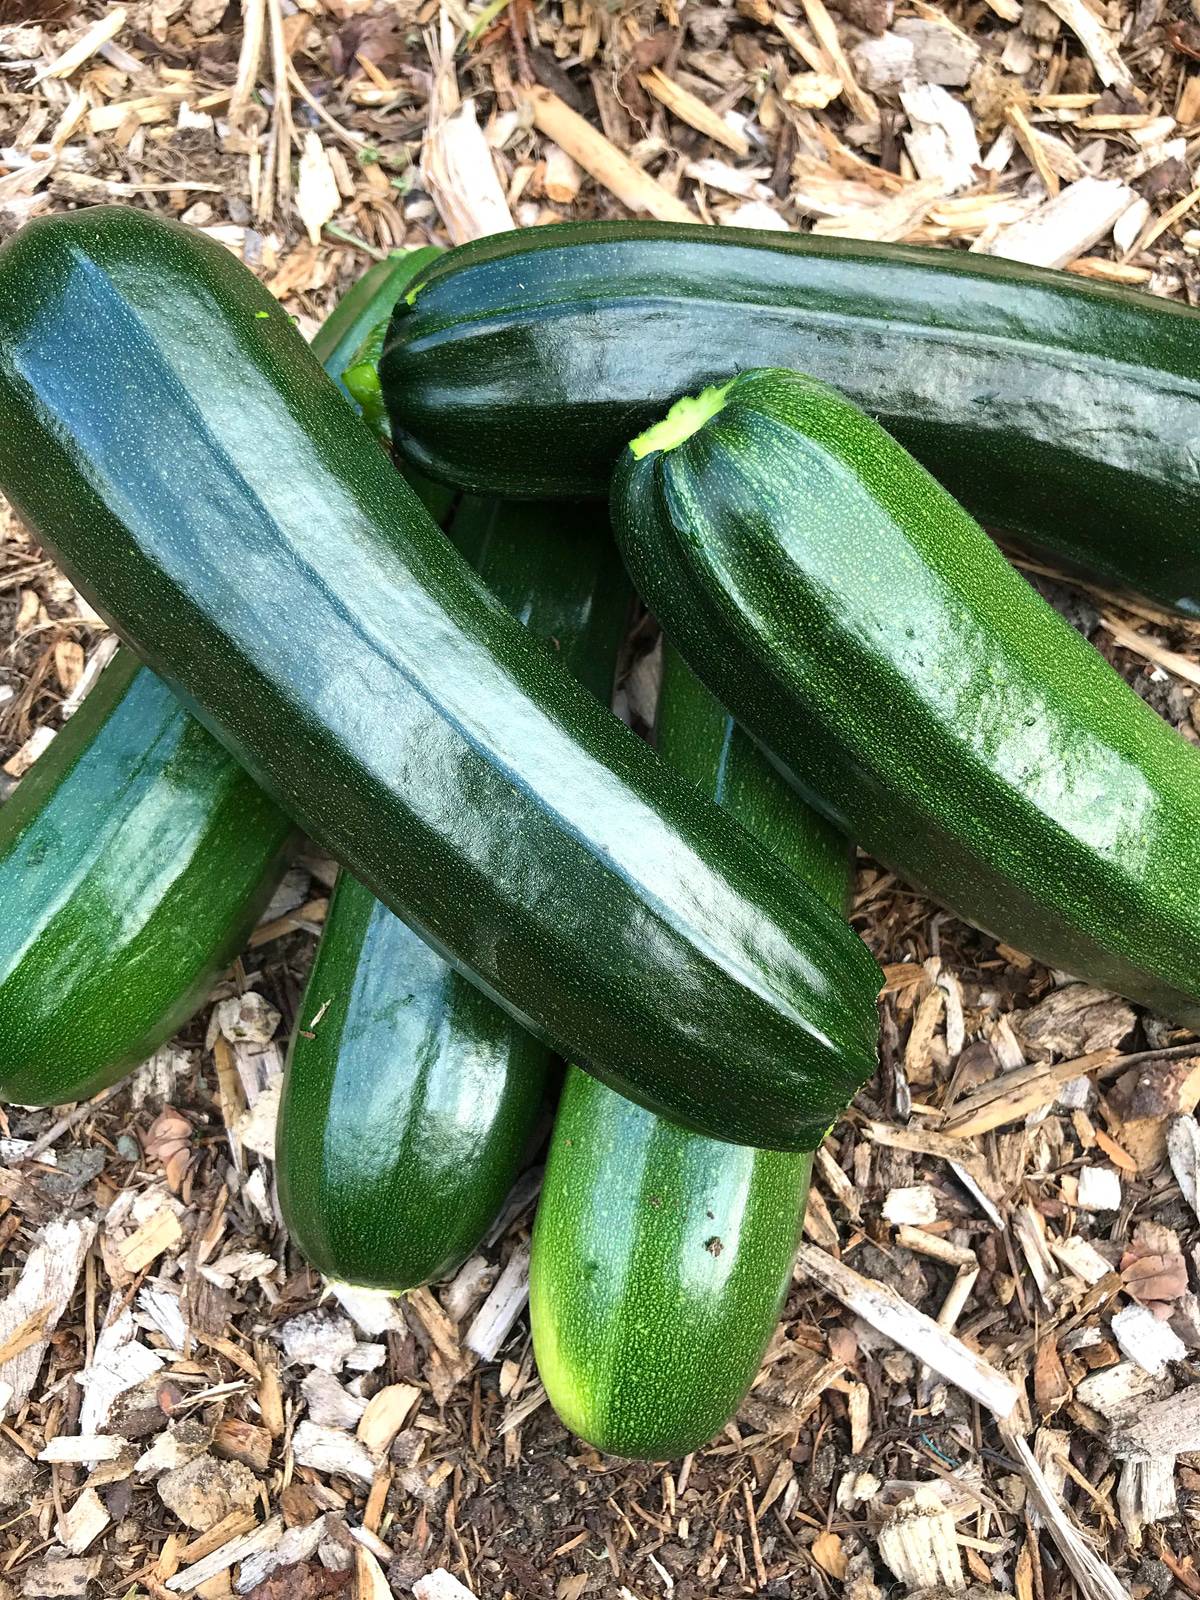 how to freeze zucchini blanch preserve